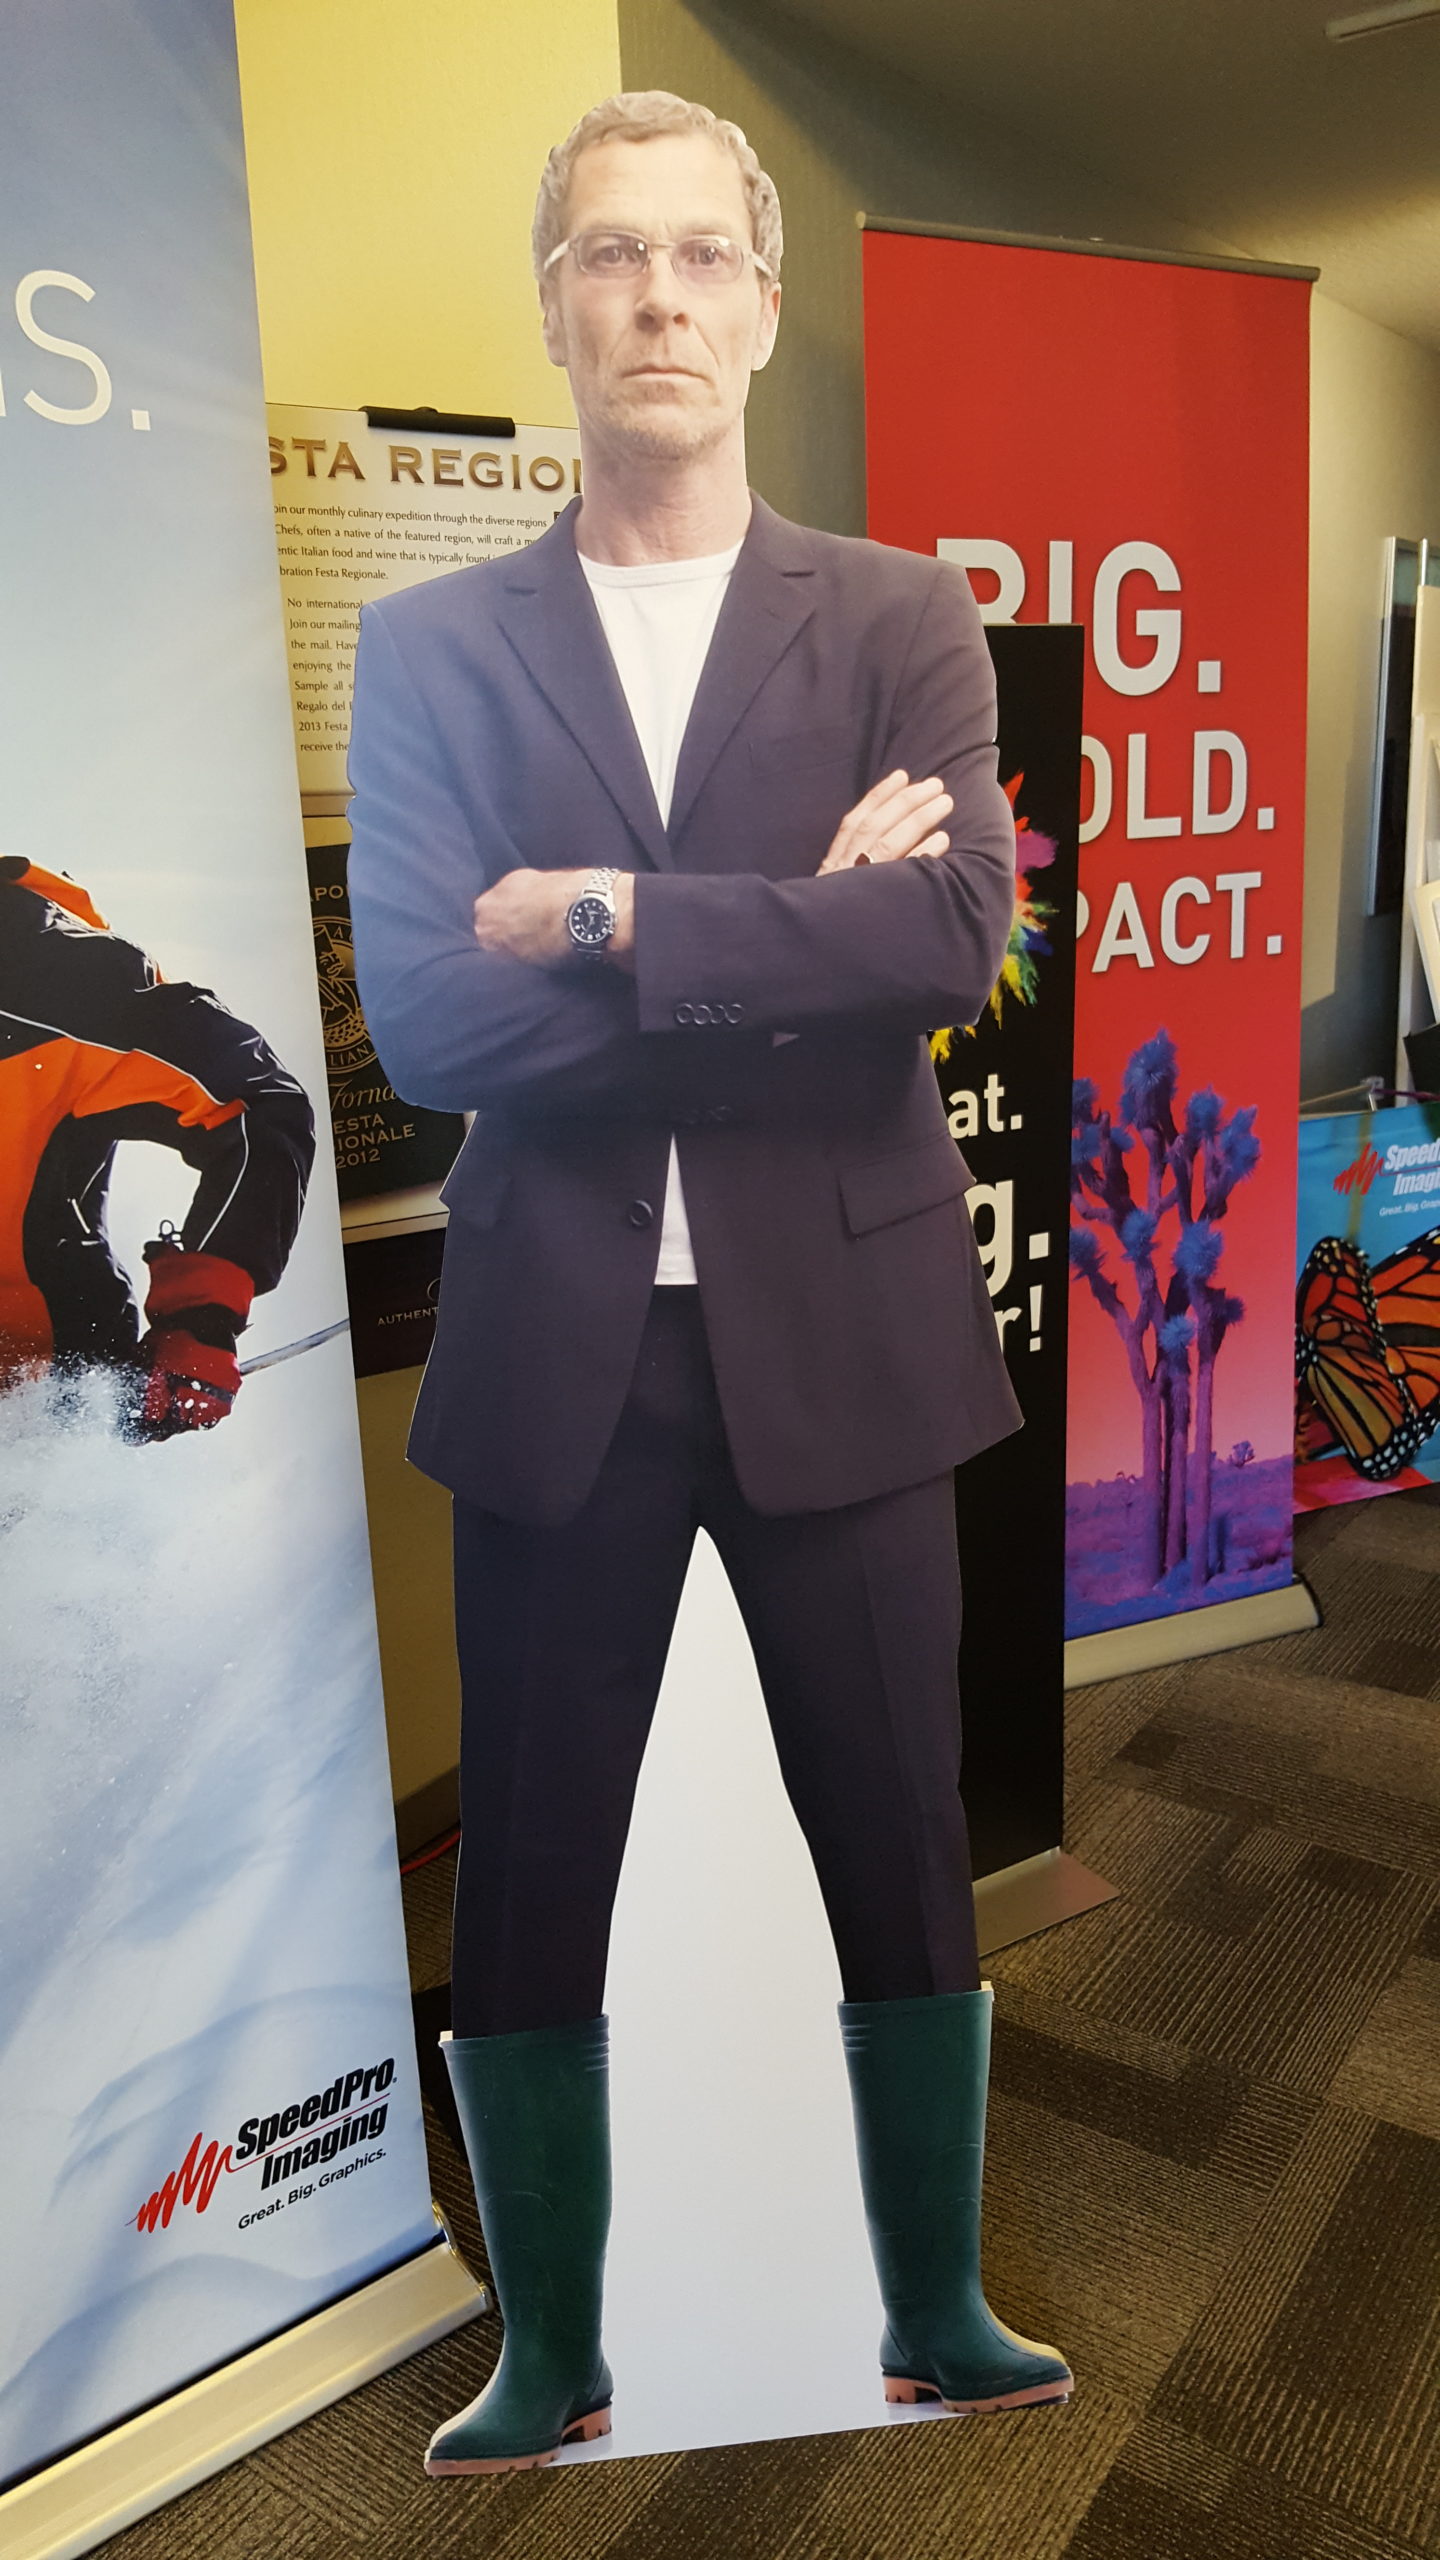 standing cardboard cutout of man in suit